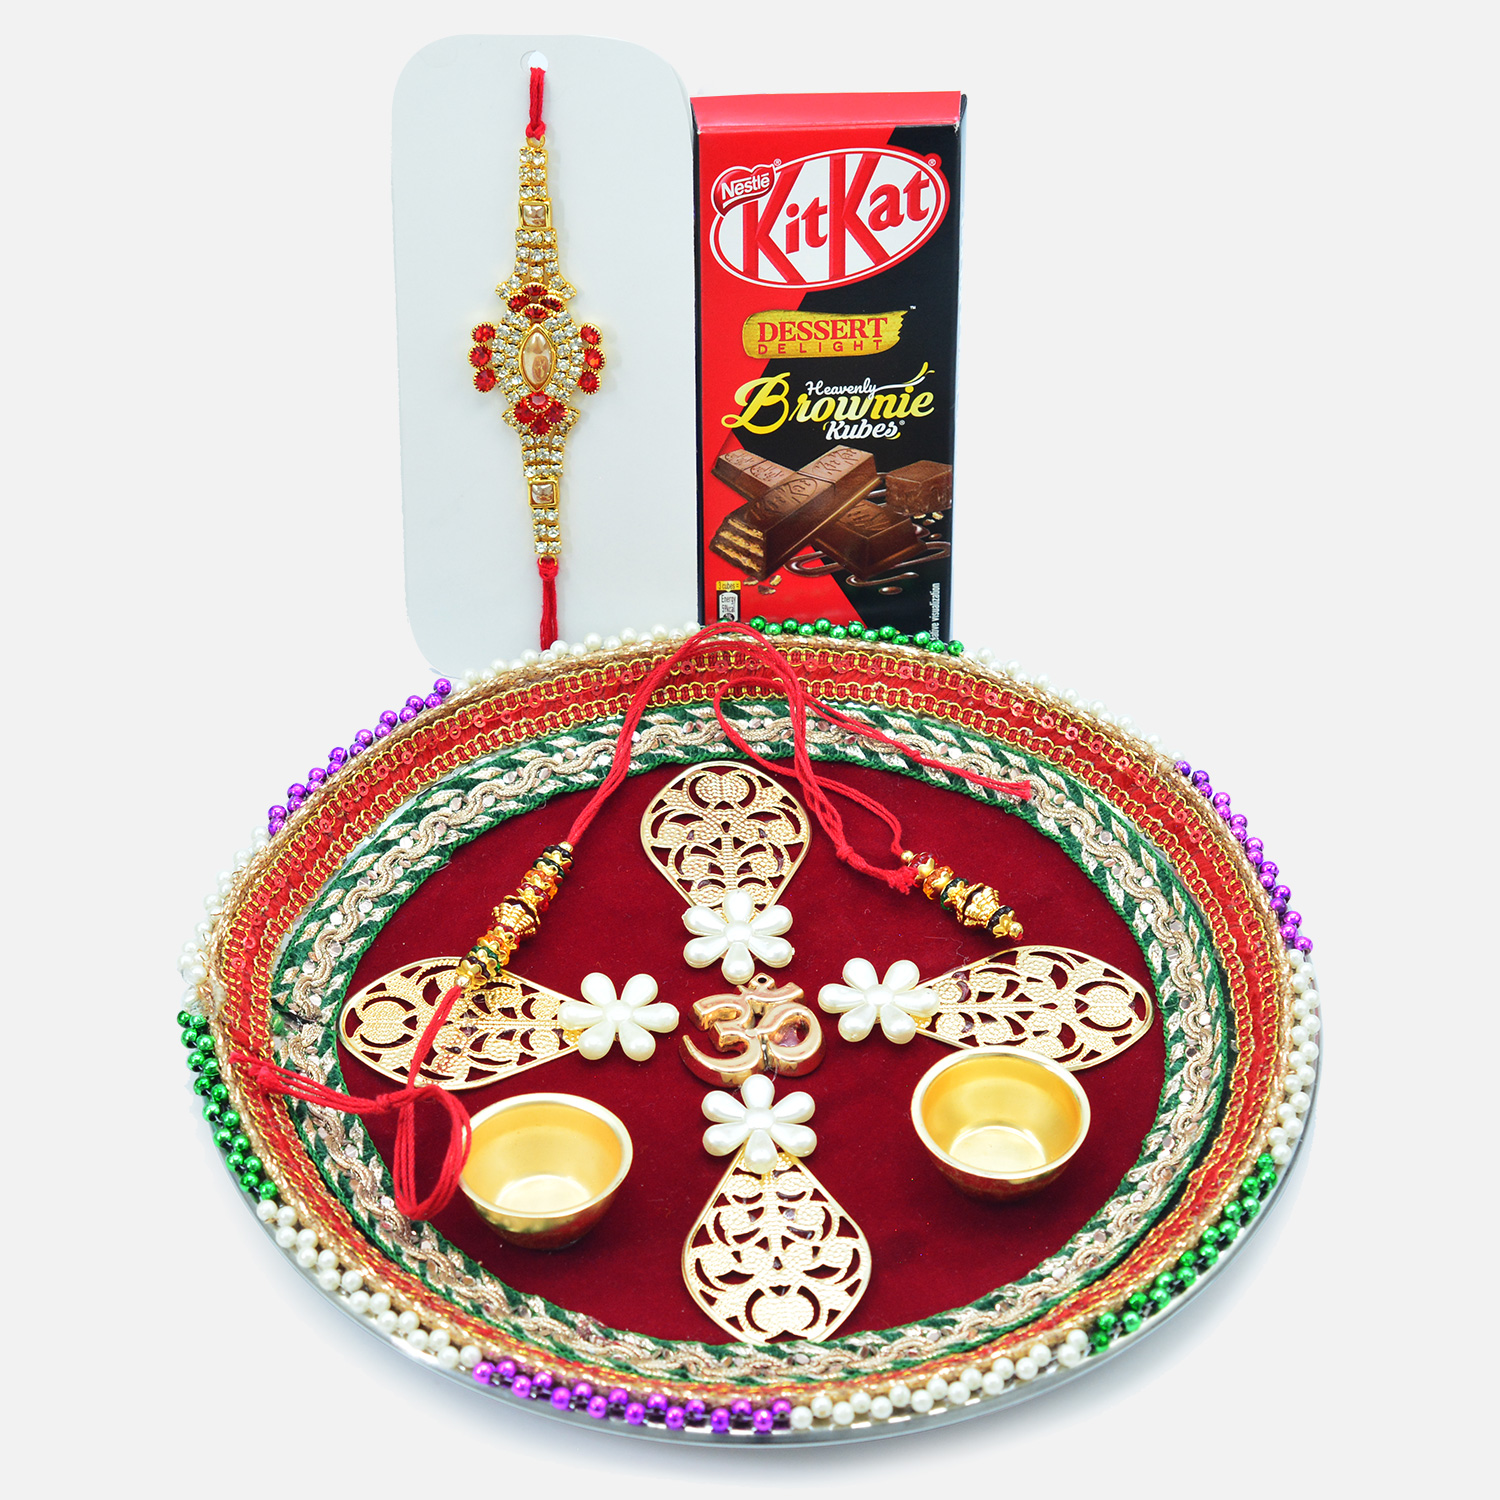 Rich Looking Auspicious Puja Thali with Stunning Looking Rakhis and Kitkat Brownie Chocolate